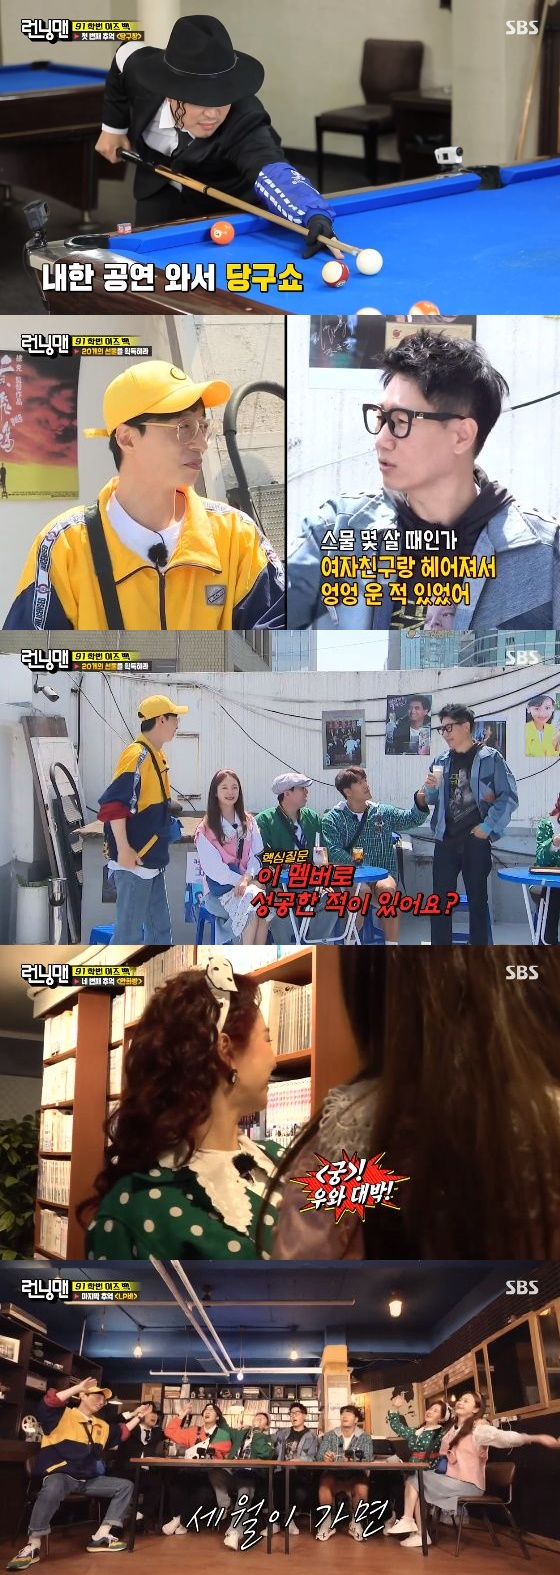 In the SBS entertainment program Running Man broadcasted on the afternoon of the afternoon, the members memories race was held with the second feature of 91th grade Izu Bag.The first mission was held at the billiards hall, and the two-to-two billiards match was won by the team of Sechan & Jongguk and Haha & Jihyo.Haha & Jihyo team won the product with the performance of Jackson Haha who showed unexpected billiard skill.The members then had to choice one by one, whether the next person would push or pull; most members choiced Minda.But Haha and Yang Se-chan only pulled in the door; the members were surprised at the unexpected Choices, who eventually failed to answer the correct answer and secured only five gifts.The next place was a 90s cafe: Yoo Jae-Suk said he often came out with Kim Yong-man and Ji Suk-jin at the time.Kim Jong-kook asked a sharp question, Did you come out expecting a romance that might happen? Yoo Jae-Suk said, Of course it comes out.Ive never been hit by Hunting, she said with a smirk.Yoo Jae-Suk was a windy monkey style, I wasnt nervous about it, Ji Suk-jin said, adding: I broke up with my girlfriend and I had a huge crying.But I have never seen it before. Yoo Jae-Suk also laughed when he said, My brother has been crying in front of me. The second memory was Top showdown; with Ji Suk-jin in first place, Yoo Jae-Suk showed a passion to take the camera to save his top.Yoo Jae-Suks passion failed to win a gift alone by sparking a fire in Hahas Top.In three seconds, he had to hide himself in the picture to challenge the successful mission. Lee Kwang-soo showed his passion for exposure that his suspenders were flowing down during the mission.Yoo Jae-Suk led several failures with a natural mission wobble; as a result, he succeeded in only his sixth attempt, securing three gifts.The last memory was LP Bar. Kim Jong-kook applied for The Years Mask, saying, Its a song that raised the singers dream behind the wandering.Members were reminiscenced as they sang along together; Jeon So-min tearfully said, The song is so sad.After the exciting song came out, Jeon So-min and Song Ji-hyo formed Mingling Sisters and showed off their memories of dance.On the other hand, Haha attracted attention wherever he went to Michael Jacksons makeup. Haha said, Was it so easy to laugh?He laughed at Michael Jacksons performance every time he was in the middle of the mission.